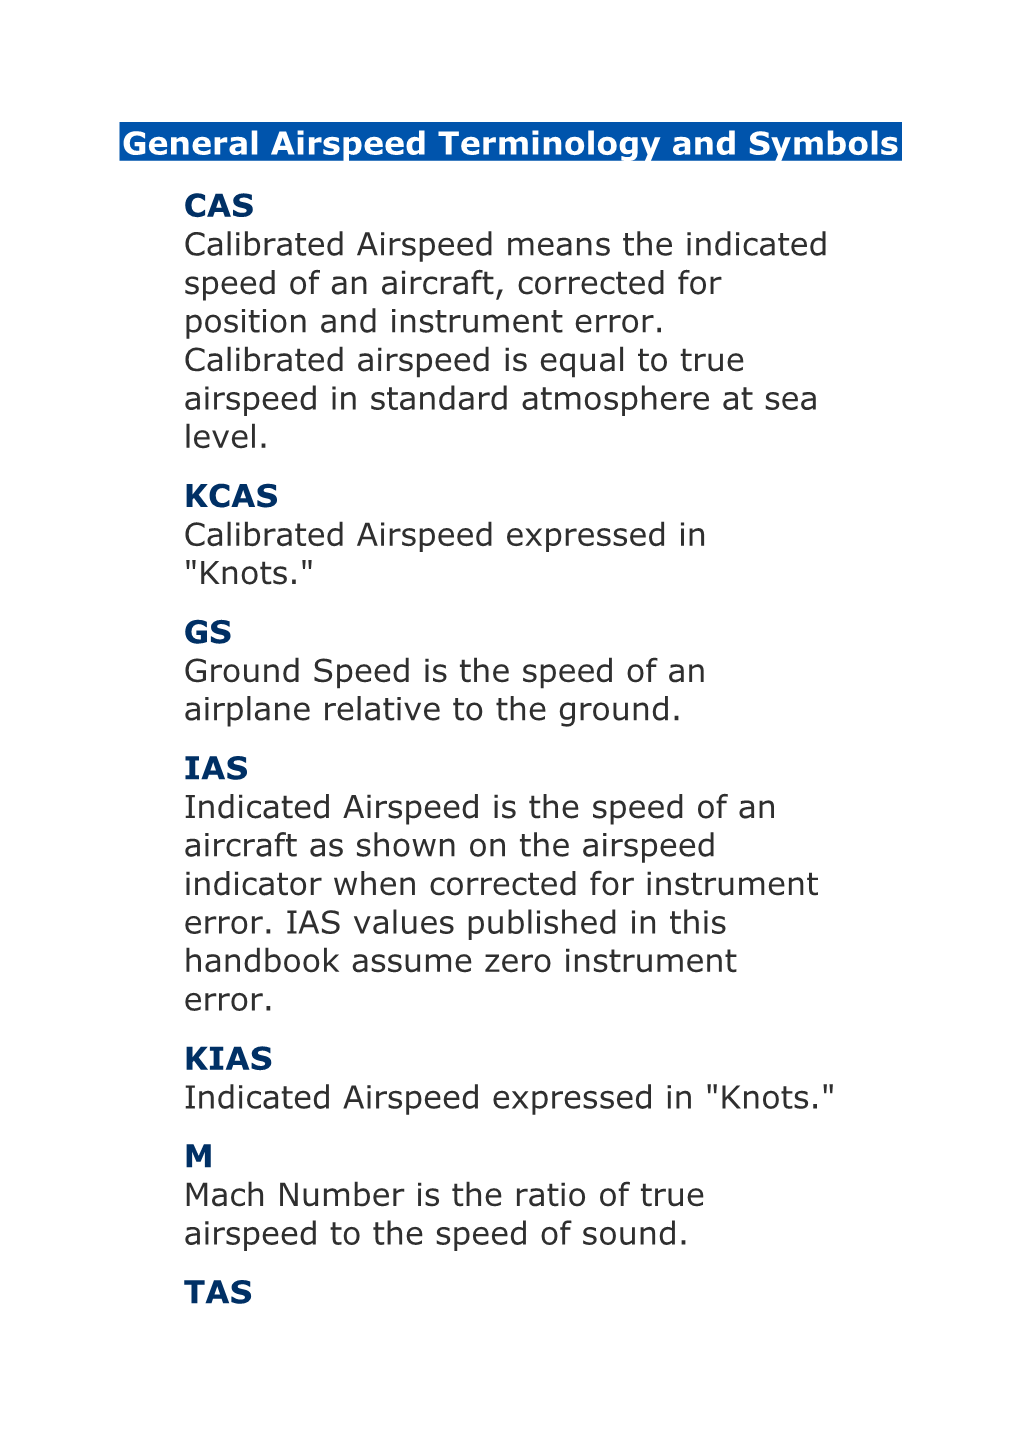 General Airspeed Terminology and Symbols CAS Calibrated Airspeed Means the Indicated Speed of an Aircraft, Corrected for Position and Instrument Error